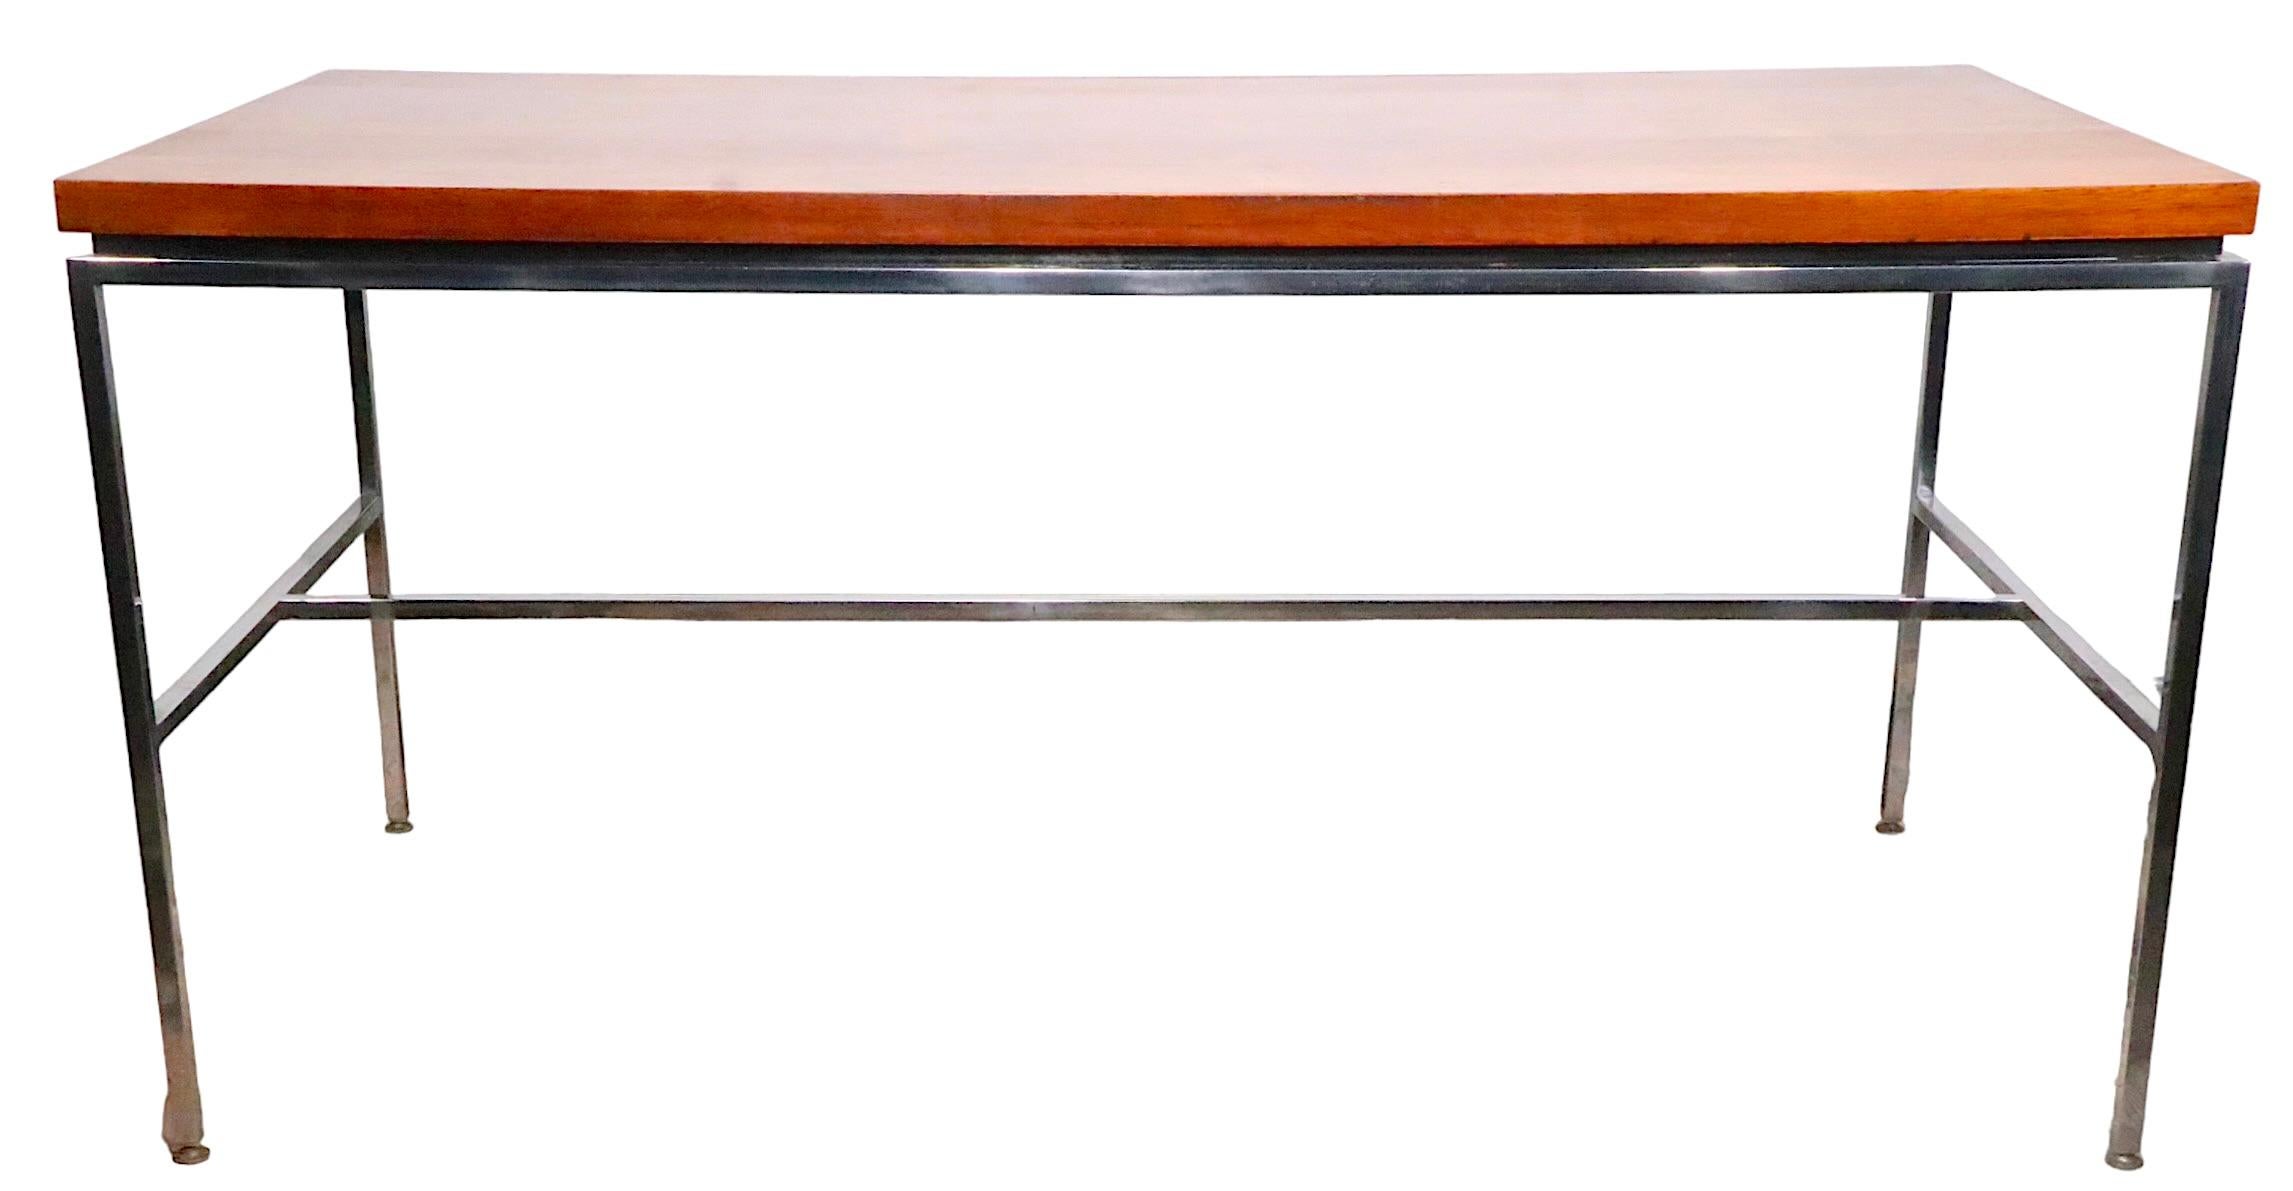 Rosewood and Chrome Drexel Index Writing Desk Library Table, circa 1970s For Sale 1